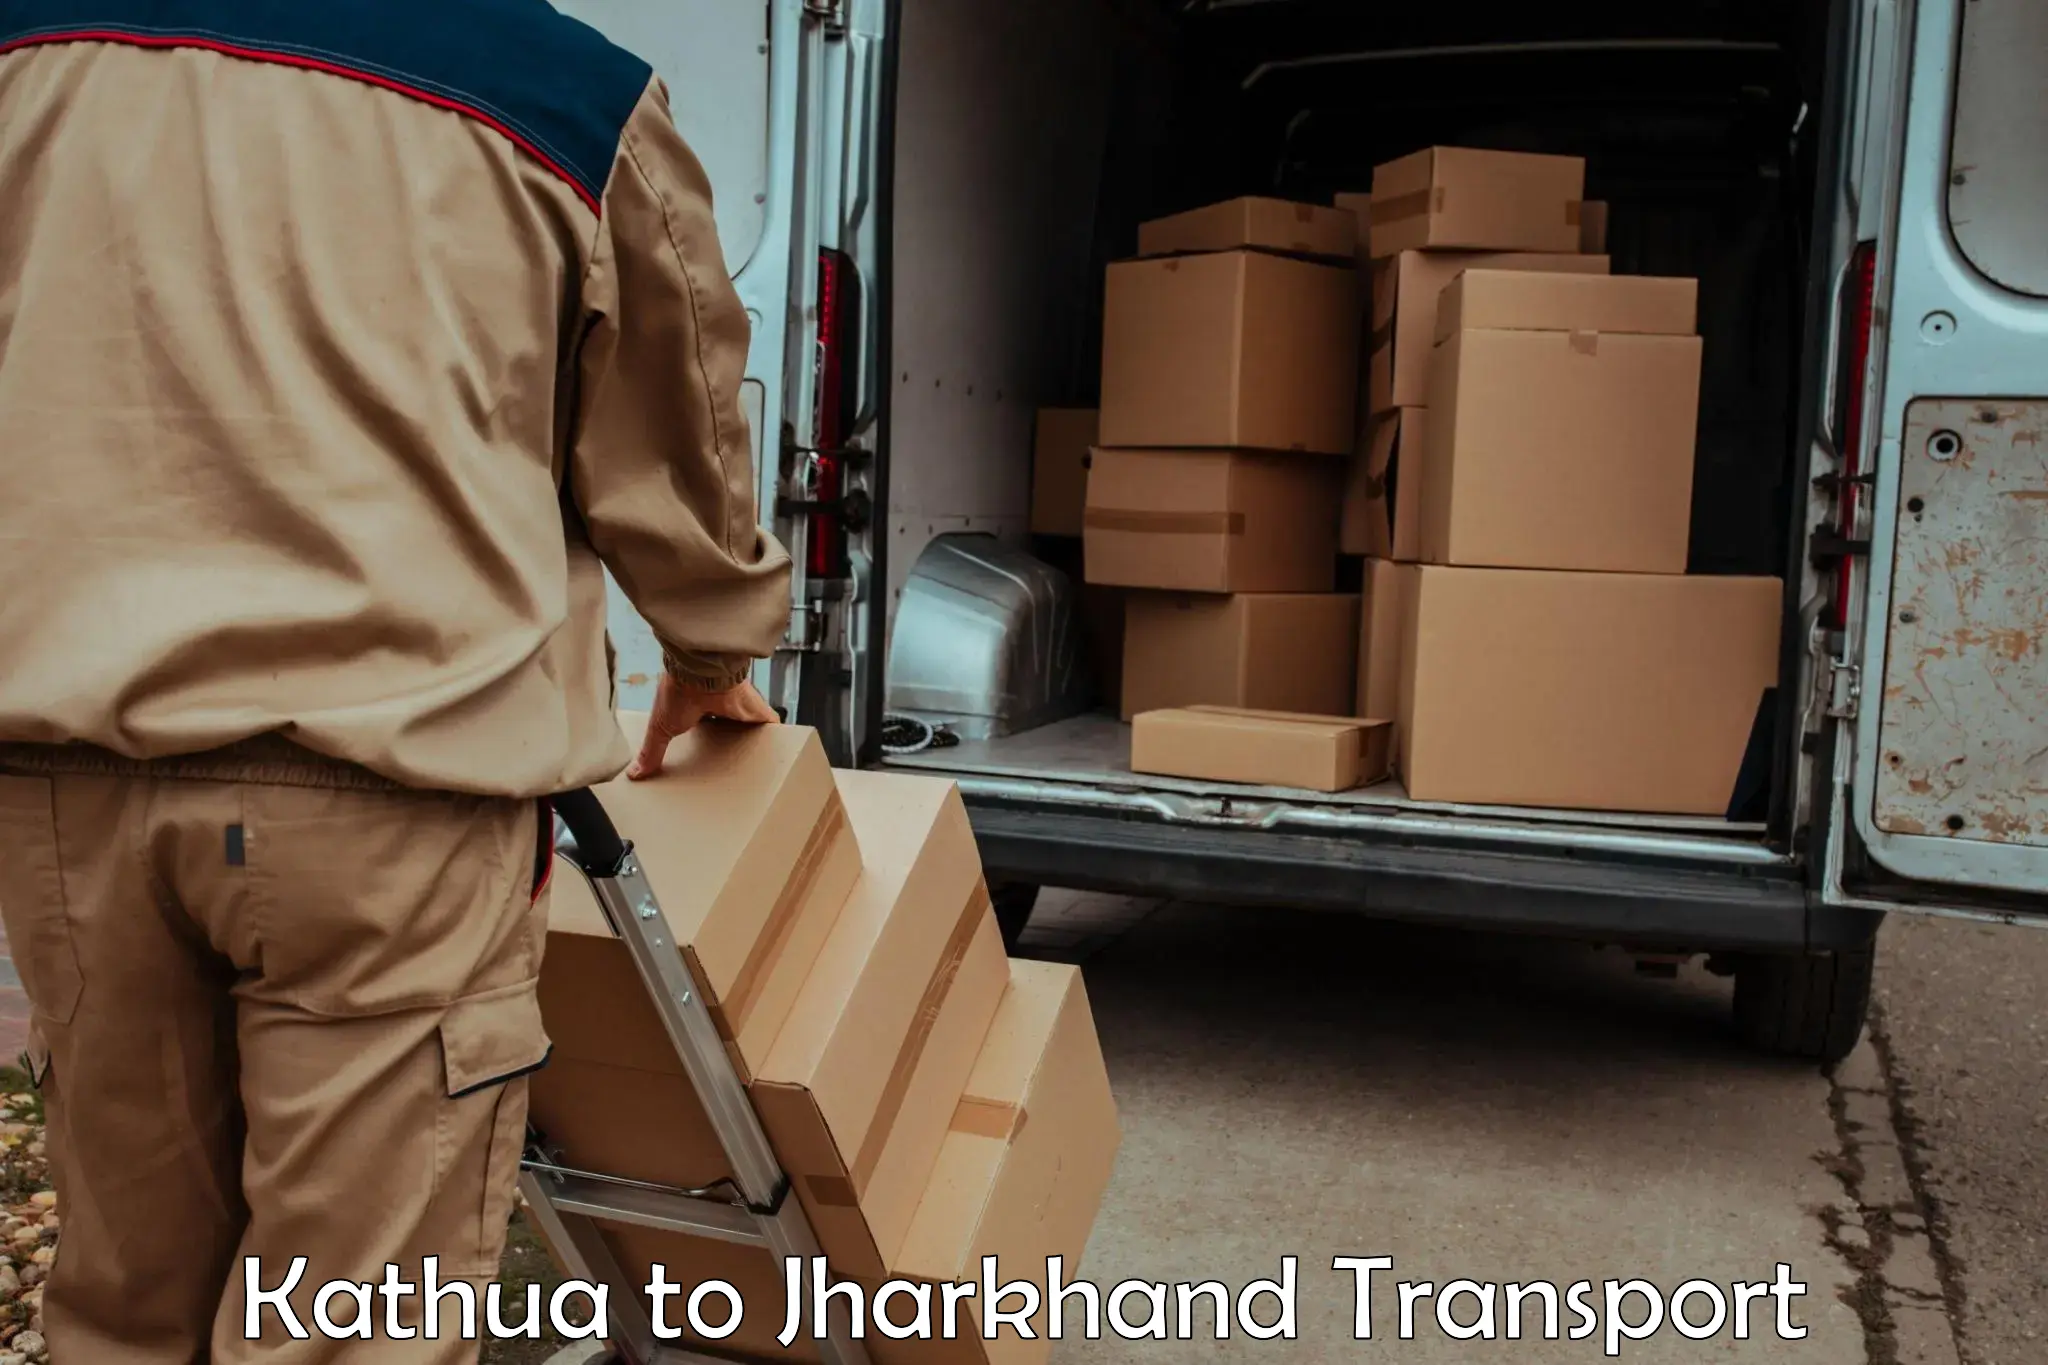 Truck transport companies in India Kathua to Jamshedpur